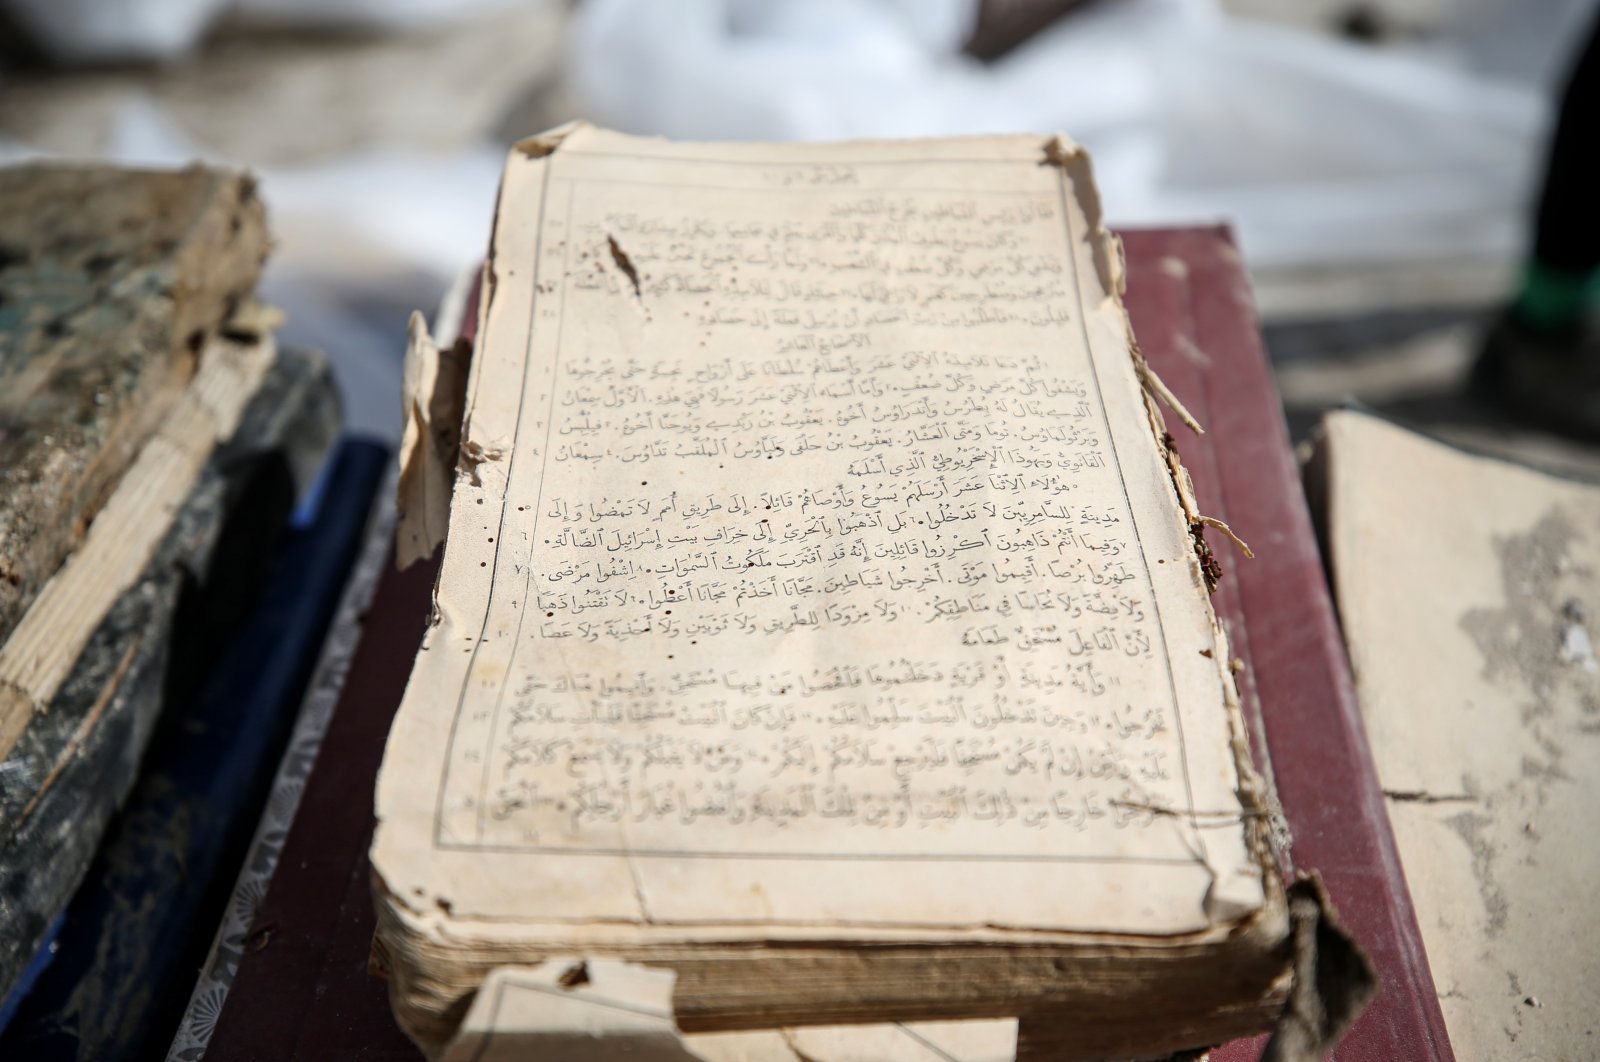 The Antakya Greek Orthodox Church in Hatay, which was destroyed in earthquakes, has been protected with numerous Bibles and various materials extracted from the debris, Hatay, Türkiye, March 15, 2023. (AA Photo)